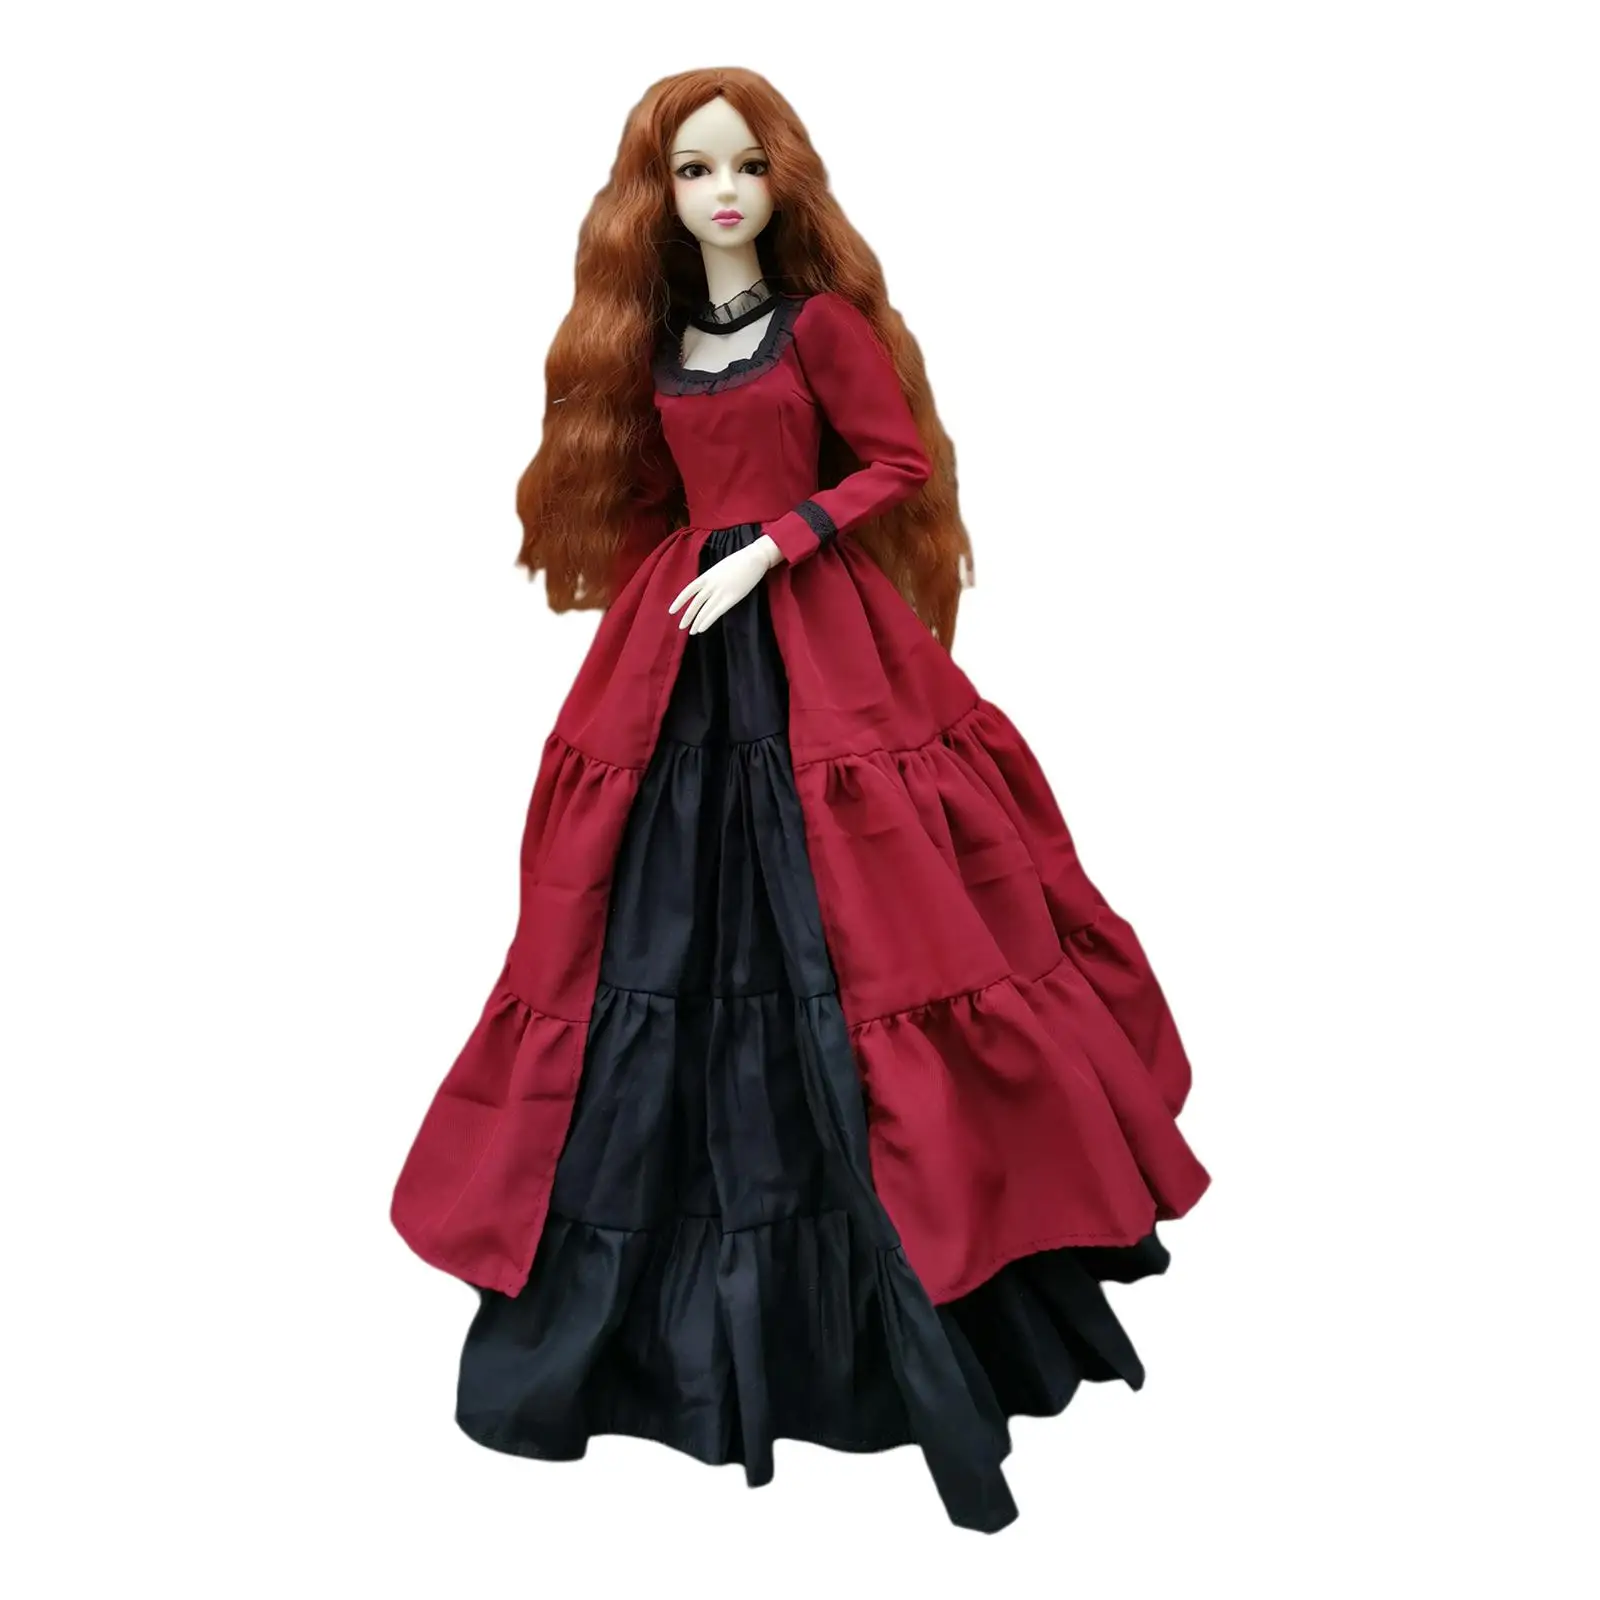 Ball Jointed Doll 1/3 Dolls with Beautiful Doll Clothes , Action Figures for Birthday Gift, Kids, Women